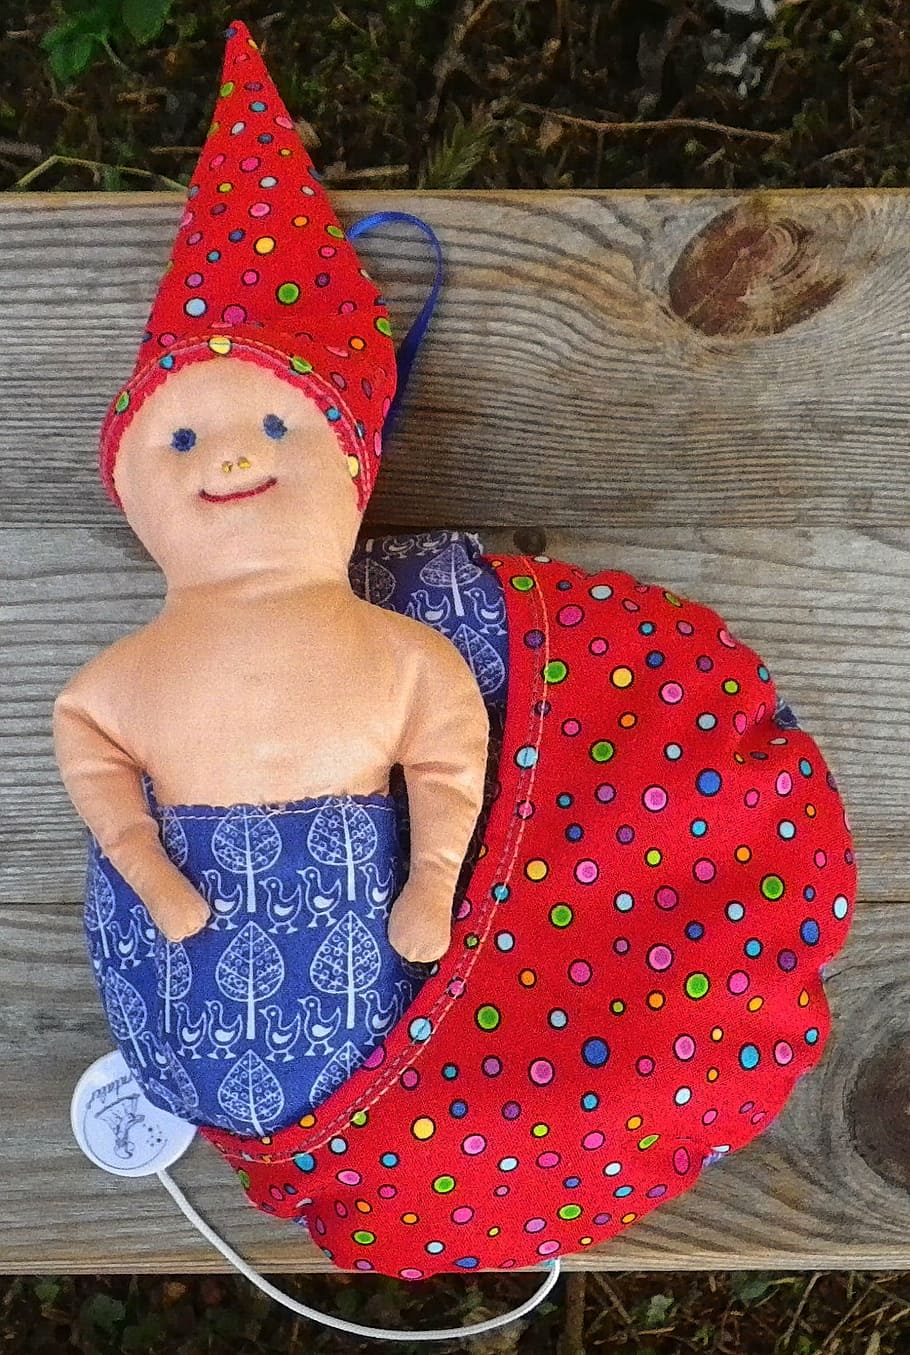 game clock, cuddly doll, mermaid, childhood, child, red, celebration, clothing, hat, wood - material